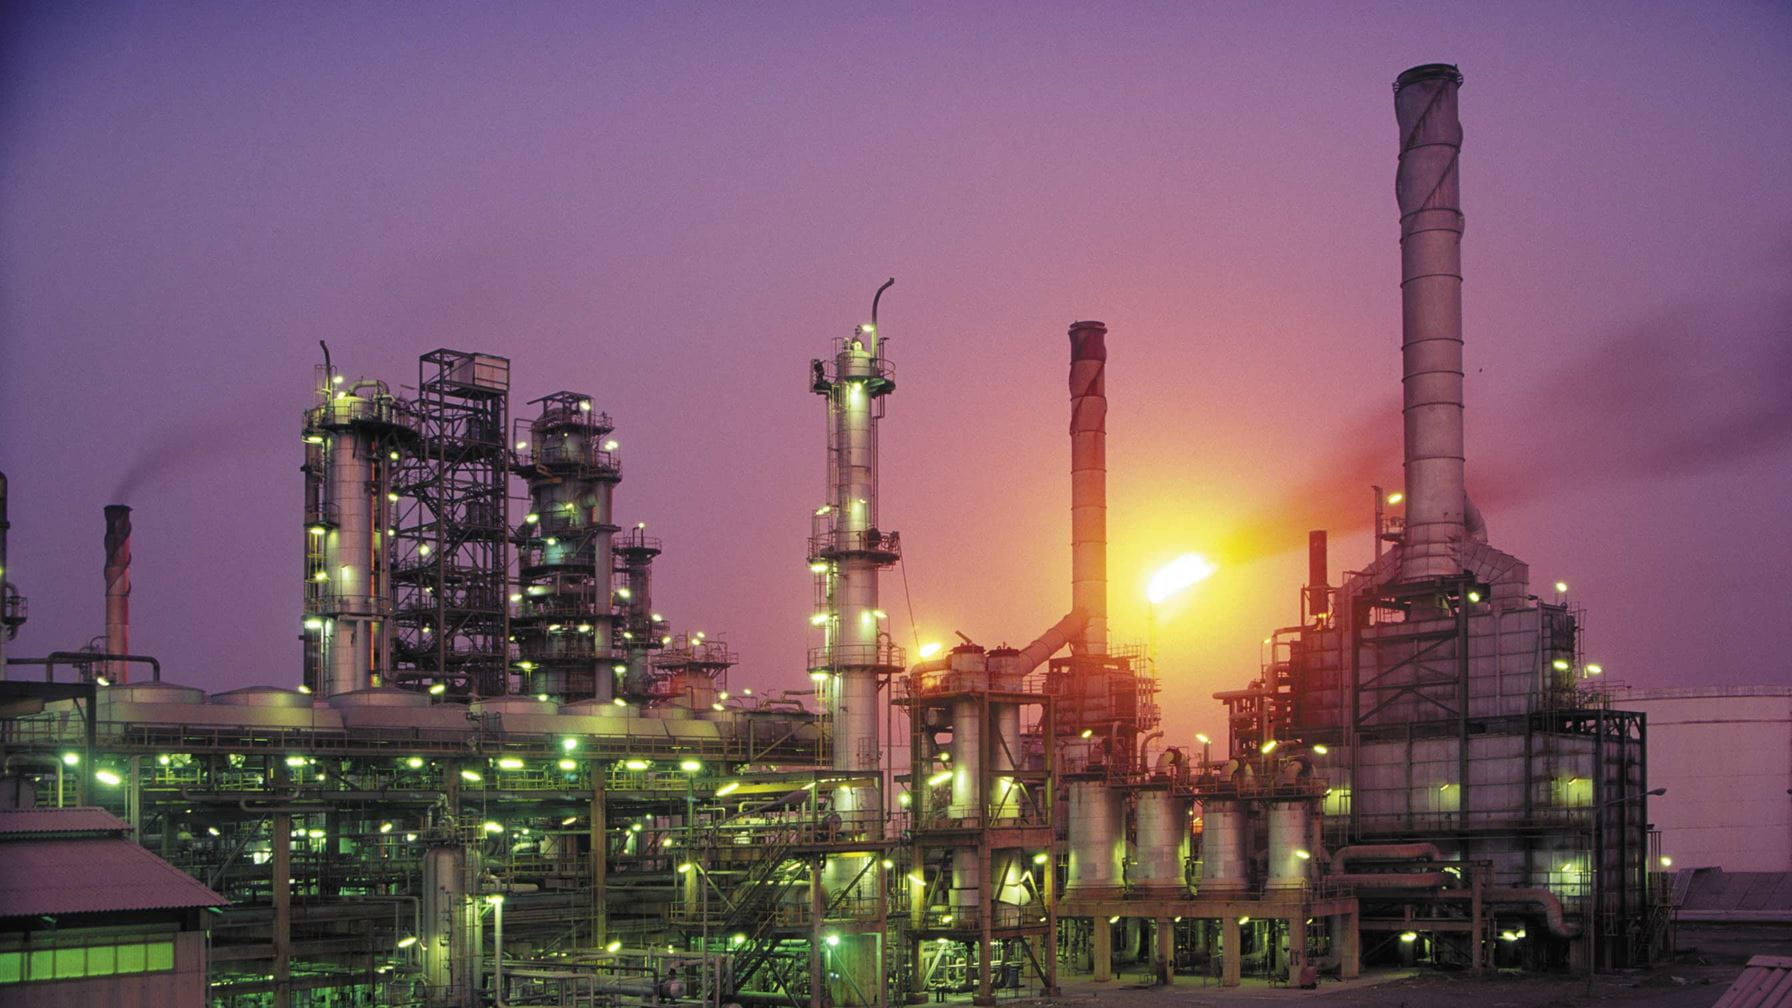 Powering an oil production site to avoid downtime